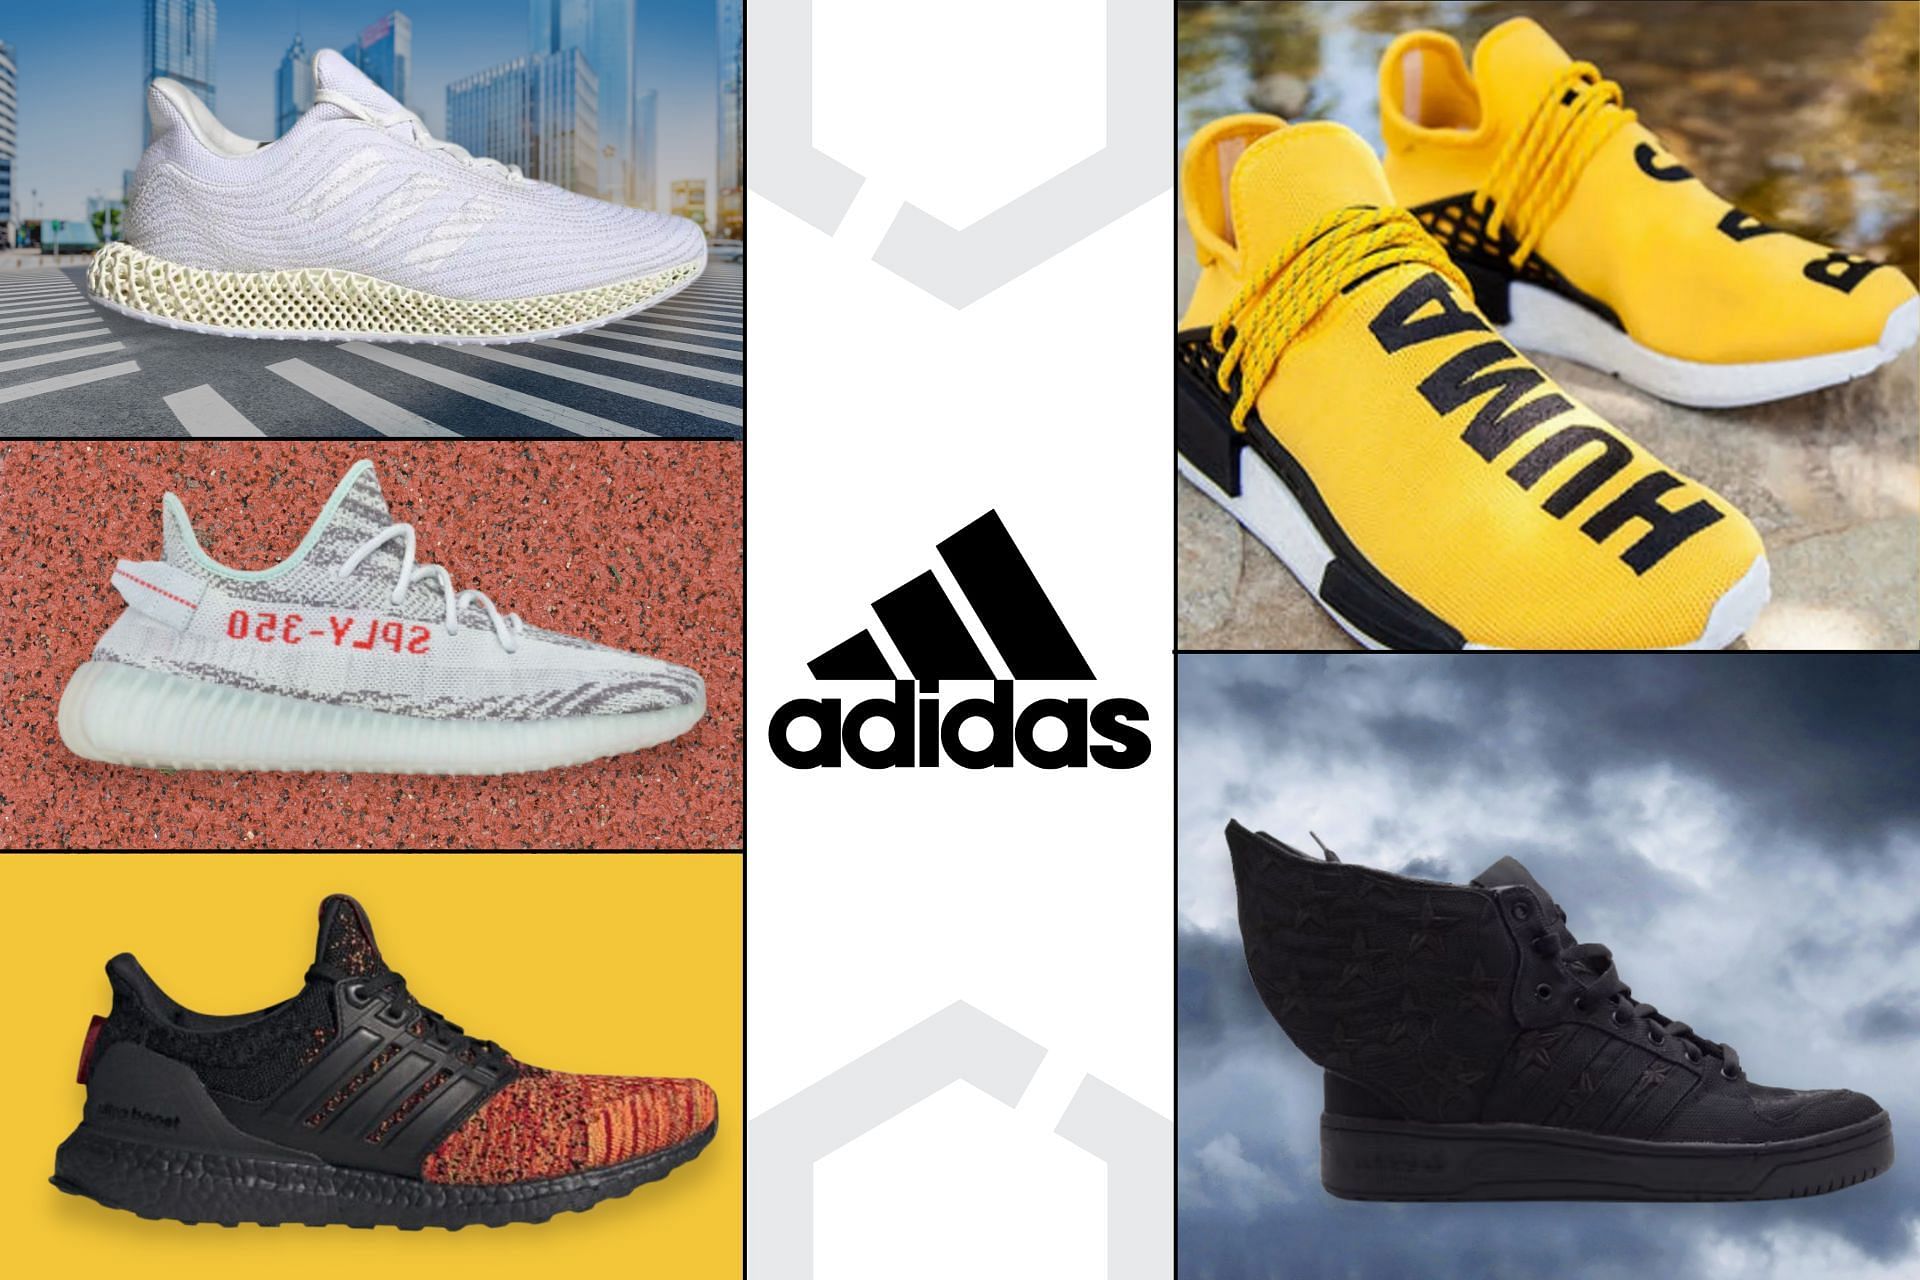 5 best Adidas collabs of all time